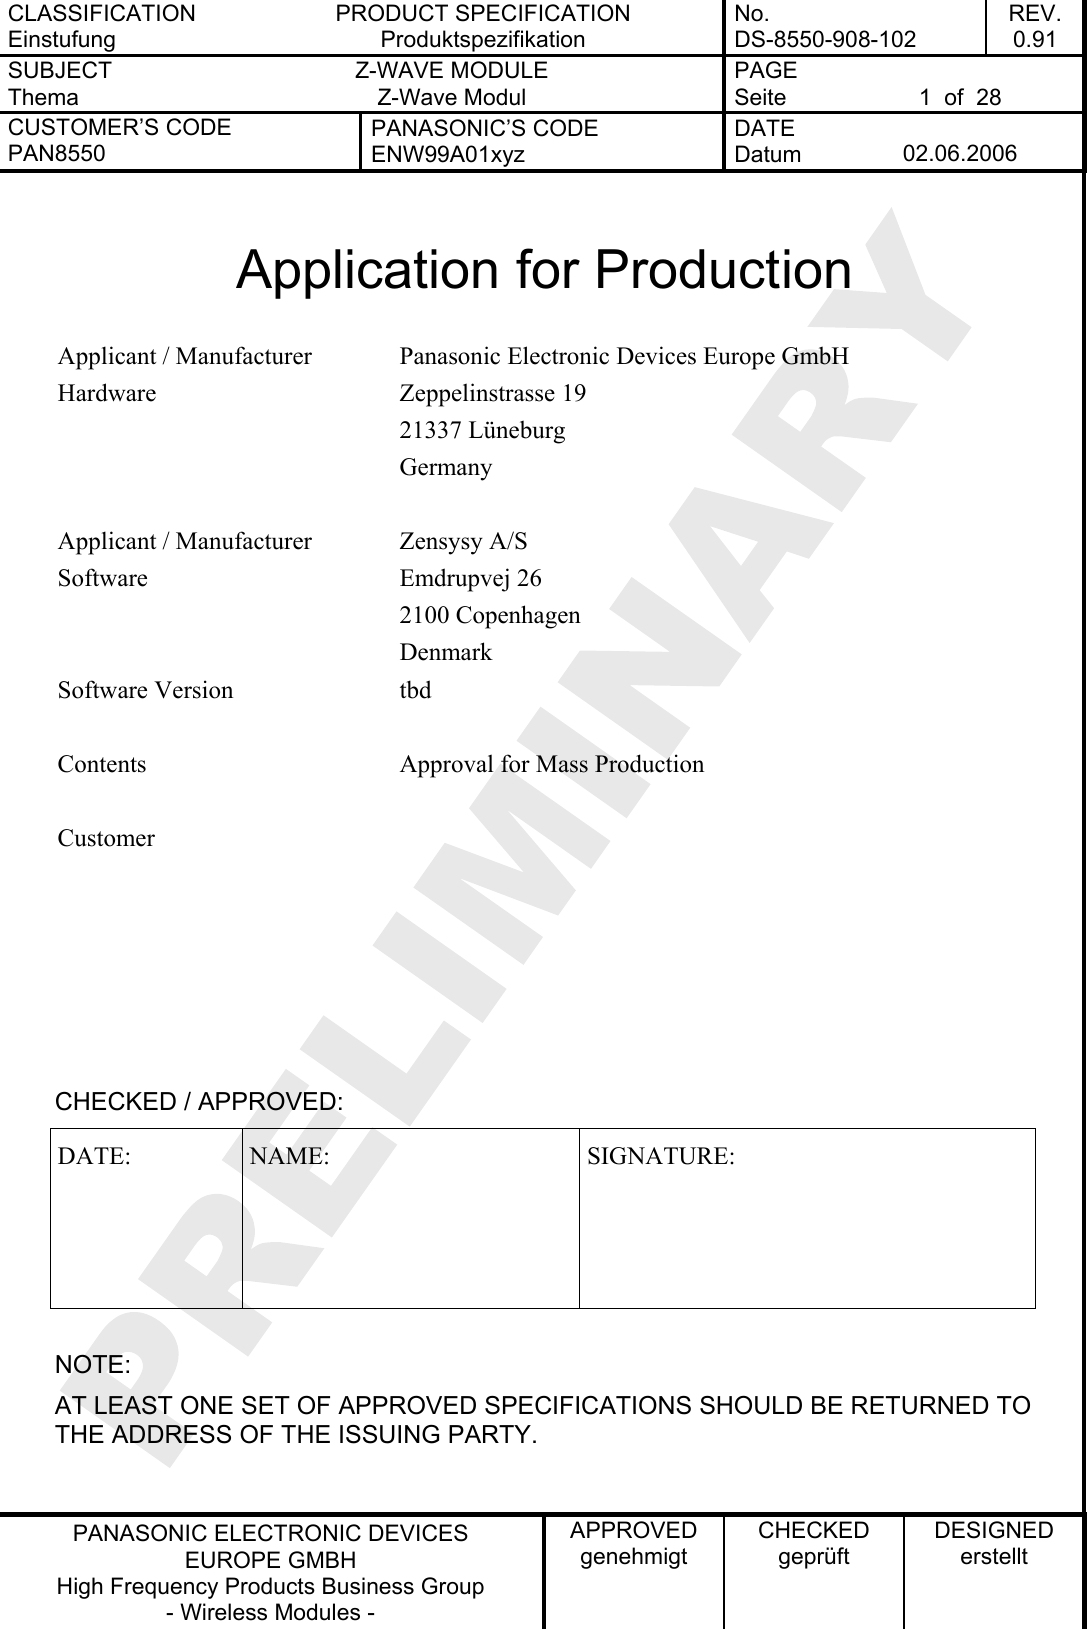 CLASSIFICATION Einstufung PRODUCT SPECIFICATION Produktspezifikation No. DS-8550-908-102 REV. 0.91 SUBJECT Thema Z-WAVE MODULE Z-Wave Modul PAGE Seite  1  of  28 CUSTOMER’S CODE PAN8550 PANASONIC’S CODE ENW99A01xyz DATE Datum  02.06.2006   PANASONIC ELECTRONIC DEVICES EUROPE GMBH High Frequency Products Business Group - Wireless Modules - APPROVED genehmigt CHECKED geprüft DESIGNED erstellt  Application for Production  Panasonic Electronic Devices Europe GmbH Zeppelinstrasse 19 21337 Lüneburg Applicant / Manufacturer Hardware Germany   Zensysy A/S Emdrupvej 26 2100 Copenhagen Applicant / Manufacturer Software Denmark Software Version  tbd   Contents  Approval for Mass Production      Customer       CHECKED / APPROVED: DATE: NAME:  SIGNATURE:  NOTE: AT LEAST ONE SET OF APPROVED SPECIFICATIONS SHOULD BE RETURNED TO THE ADDRESS OF THE ISSUING PARTY. 